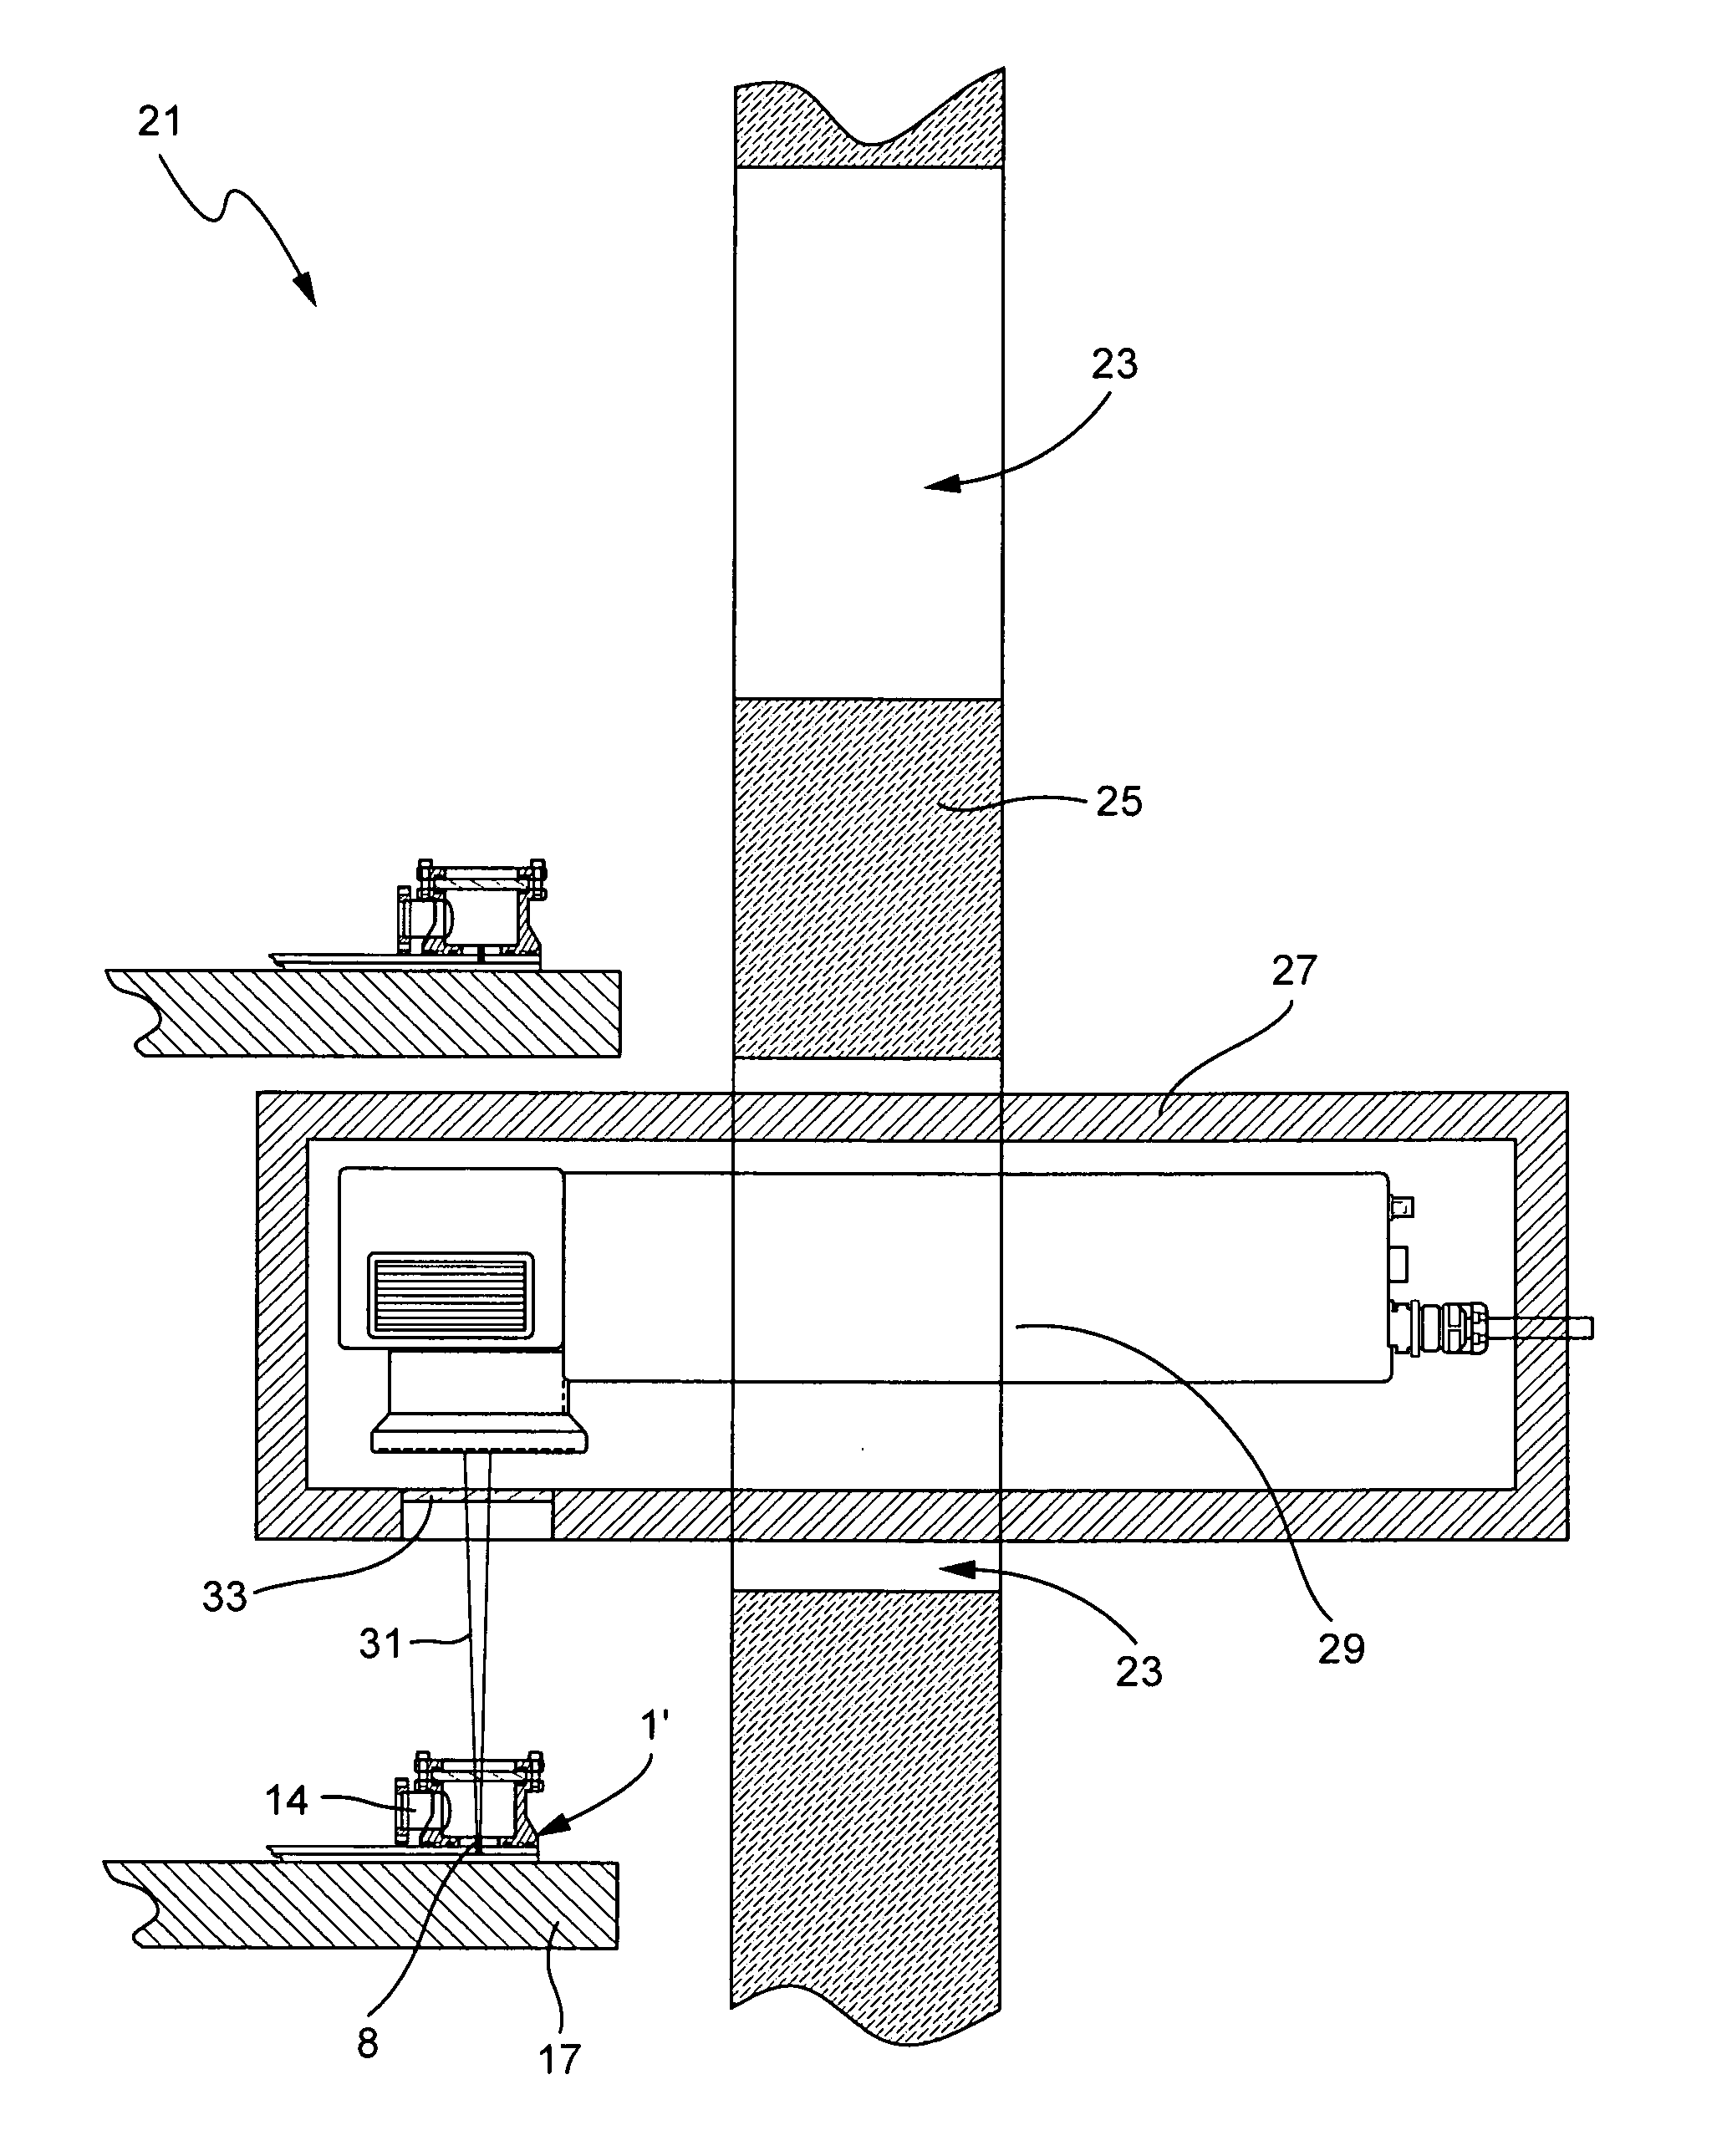 Apparatuses for vacuum insulating glass (VIG) unit tip-off, and/or associated methods